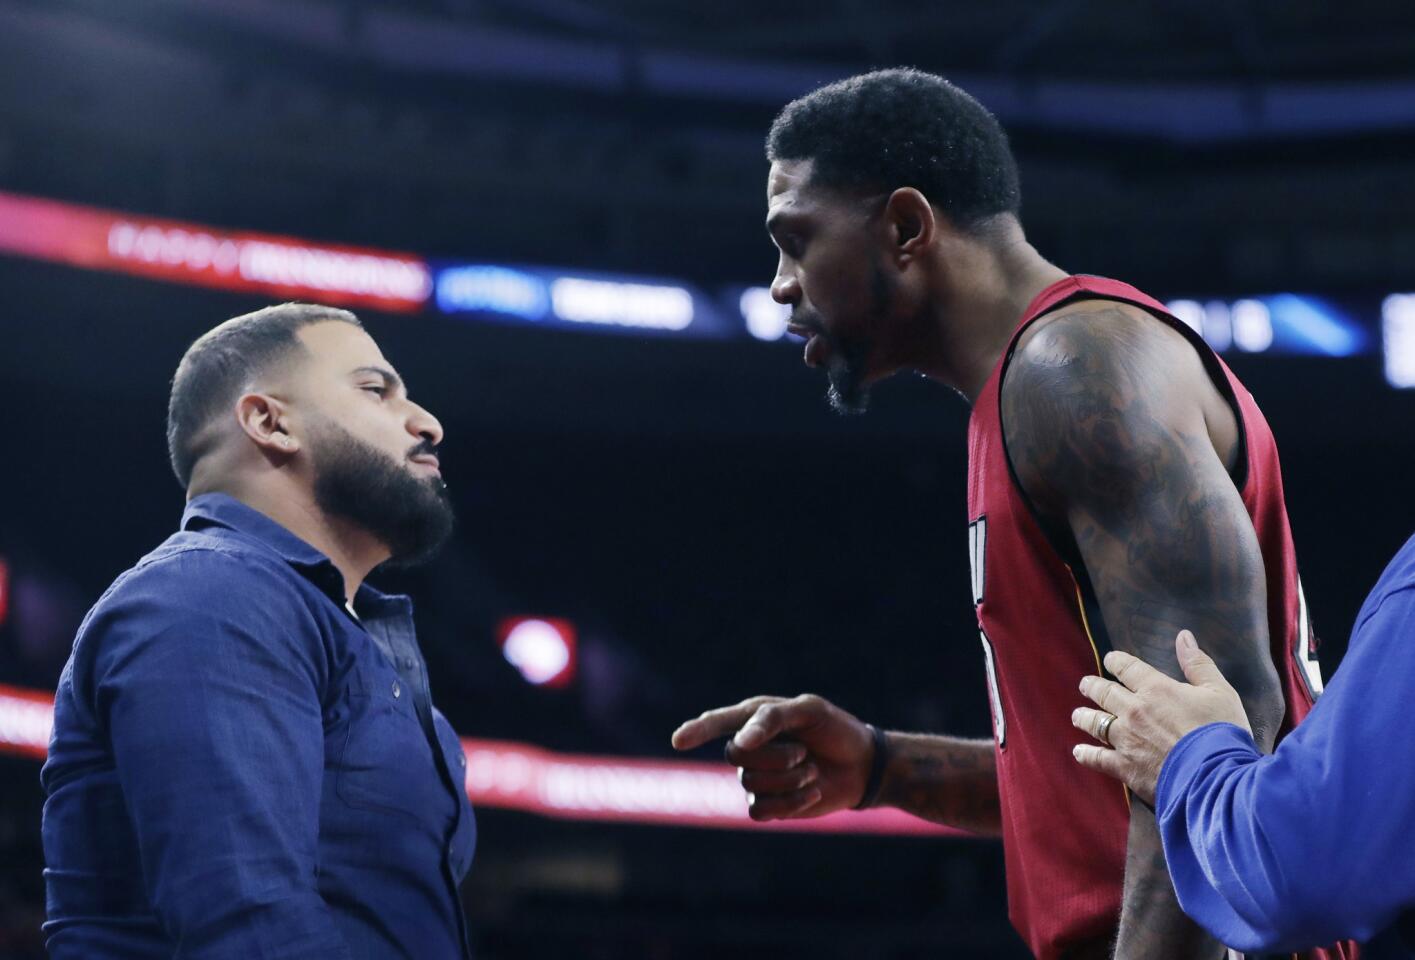 Miami Heat forward Udonis Haslem is separated from a fan who Haslem felt was taunting him during the second half of an NBA basketball game against the Detroit Pistons, Wednesday, Nov. 23, 2016 in Auburn Hills, Mich. (AP Photo/Carlos Osorio)